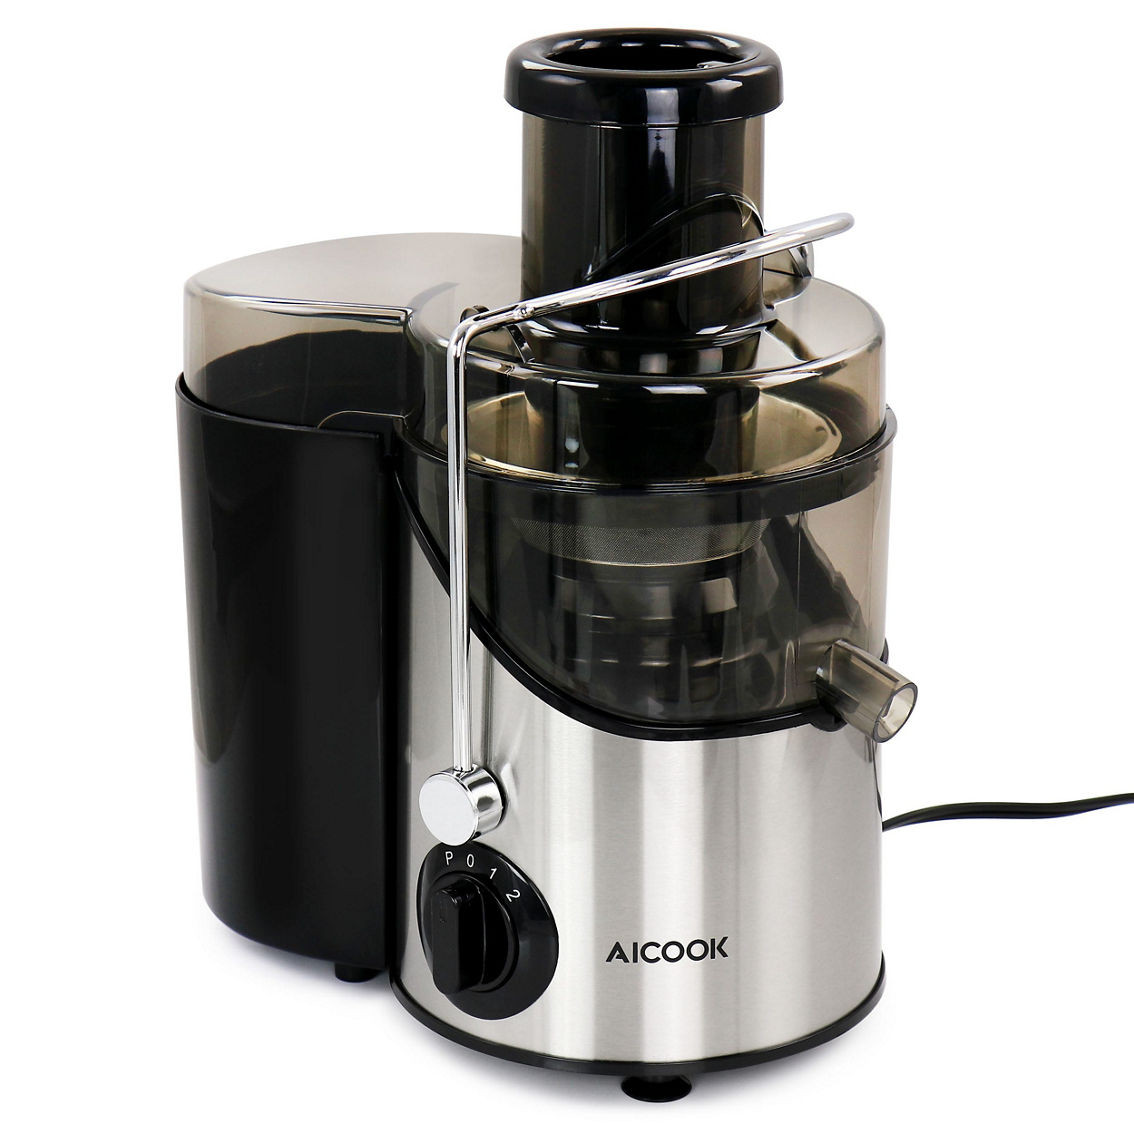 AICOOK Centrifugal Self Cleaning Juicer and Juice Extractor in Silver - Image 2 of 5